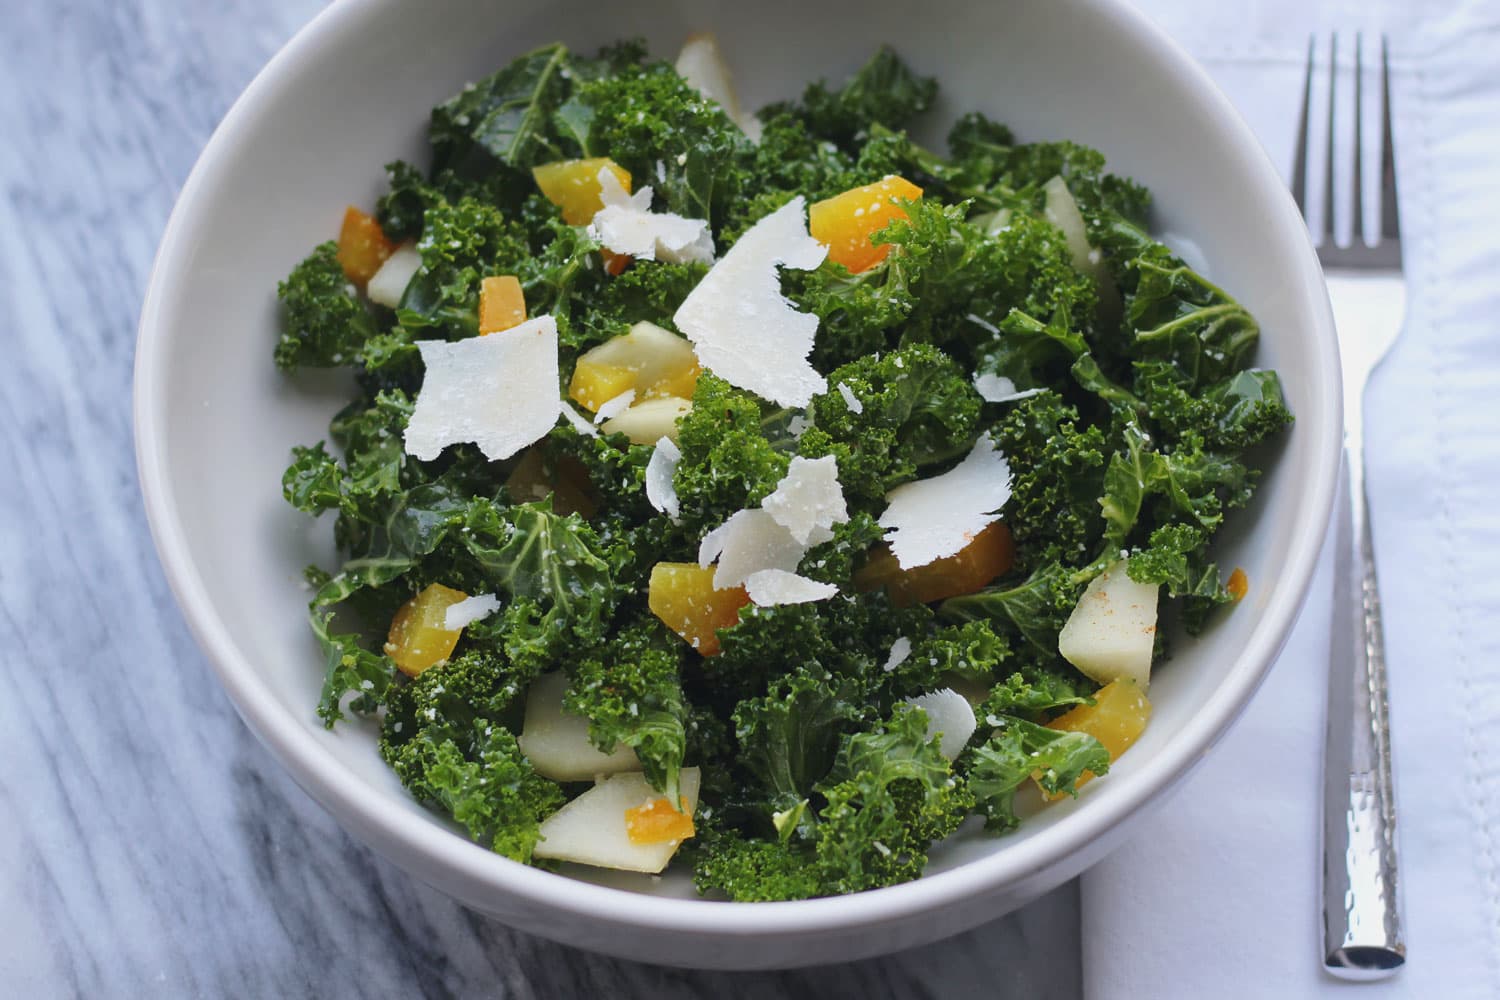 Image of Kale Salad with Pear and Golden Beets.